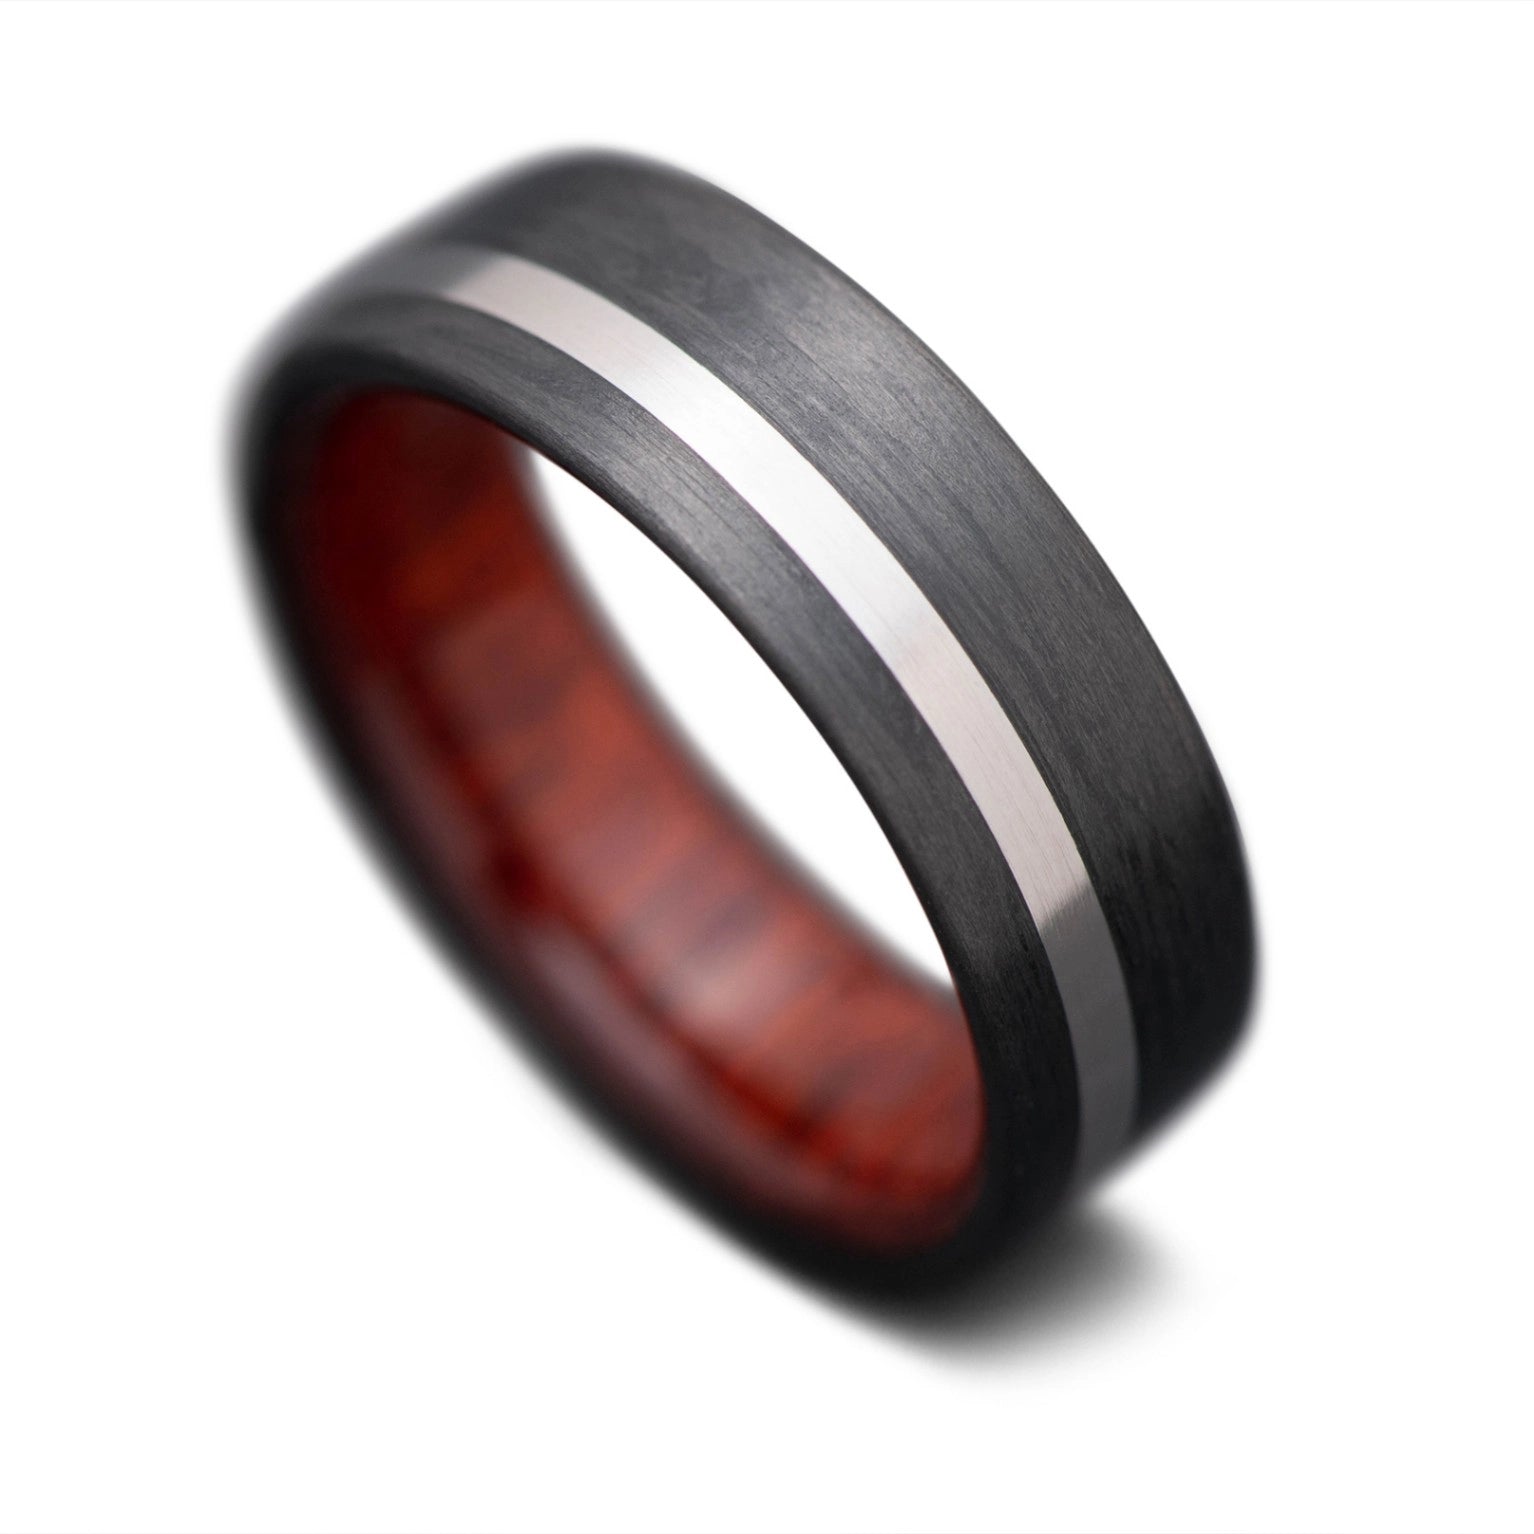 CarbonUni Core ring with Titanium inlay and Bloodwood inner sleeve, 7mm -THE VERTEX